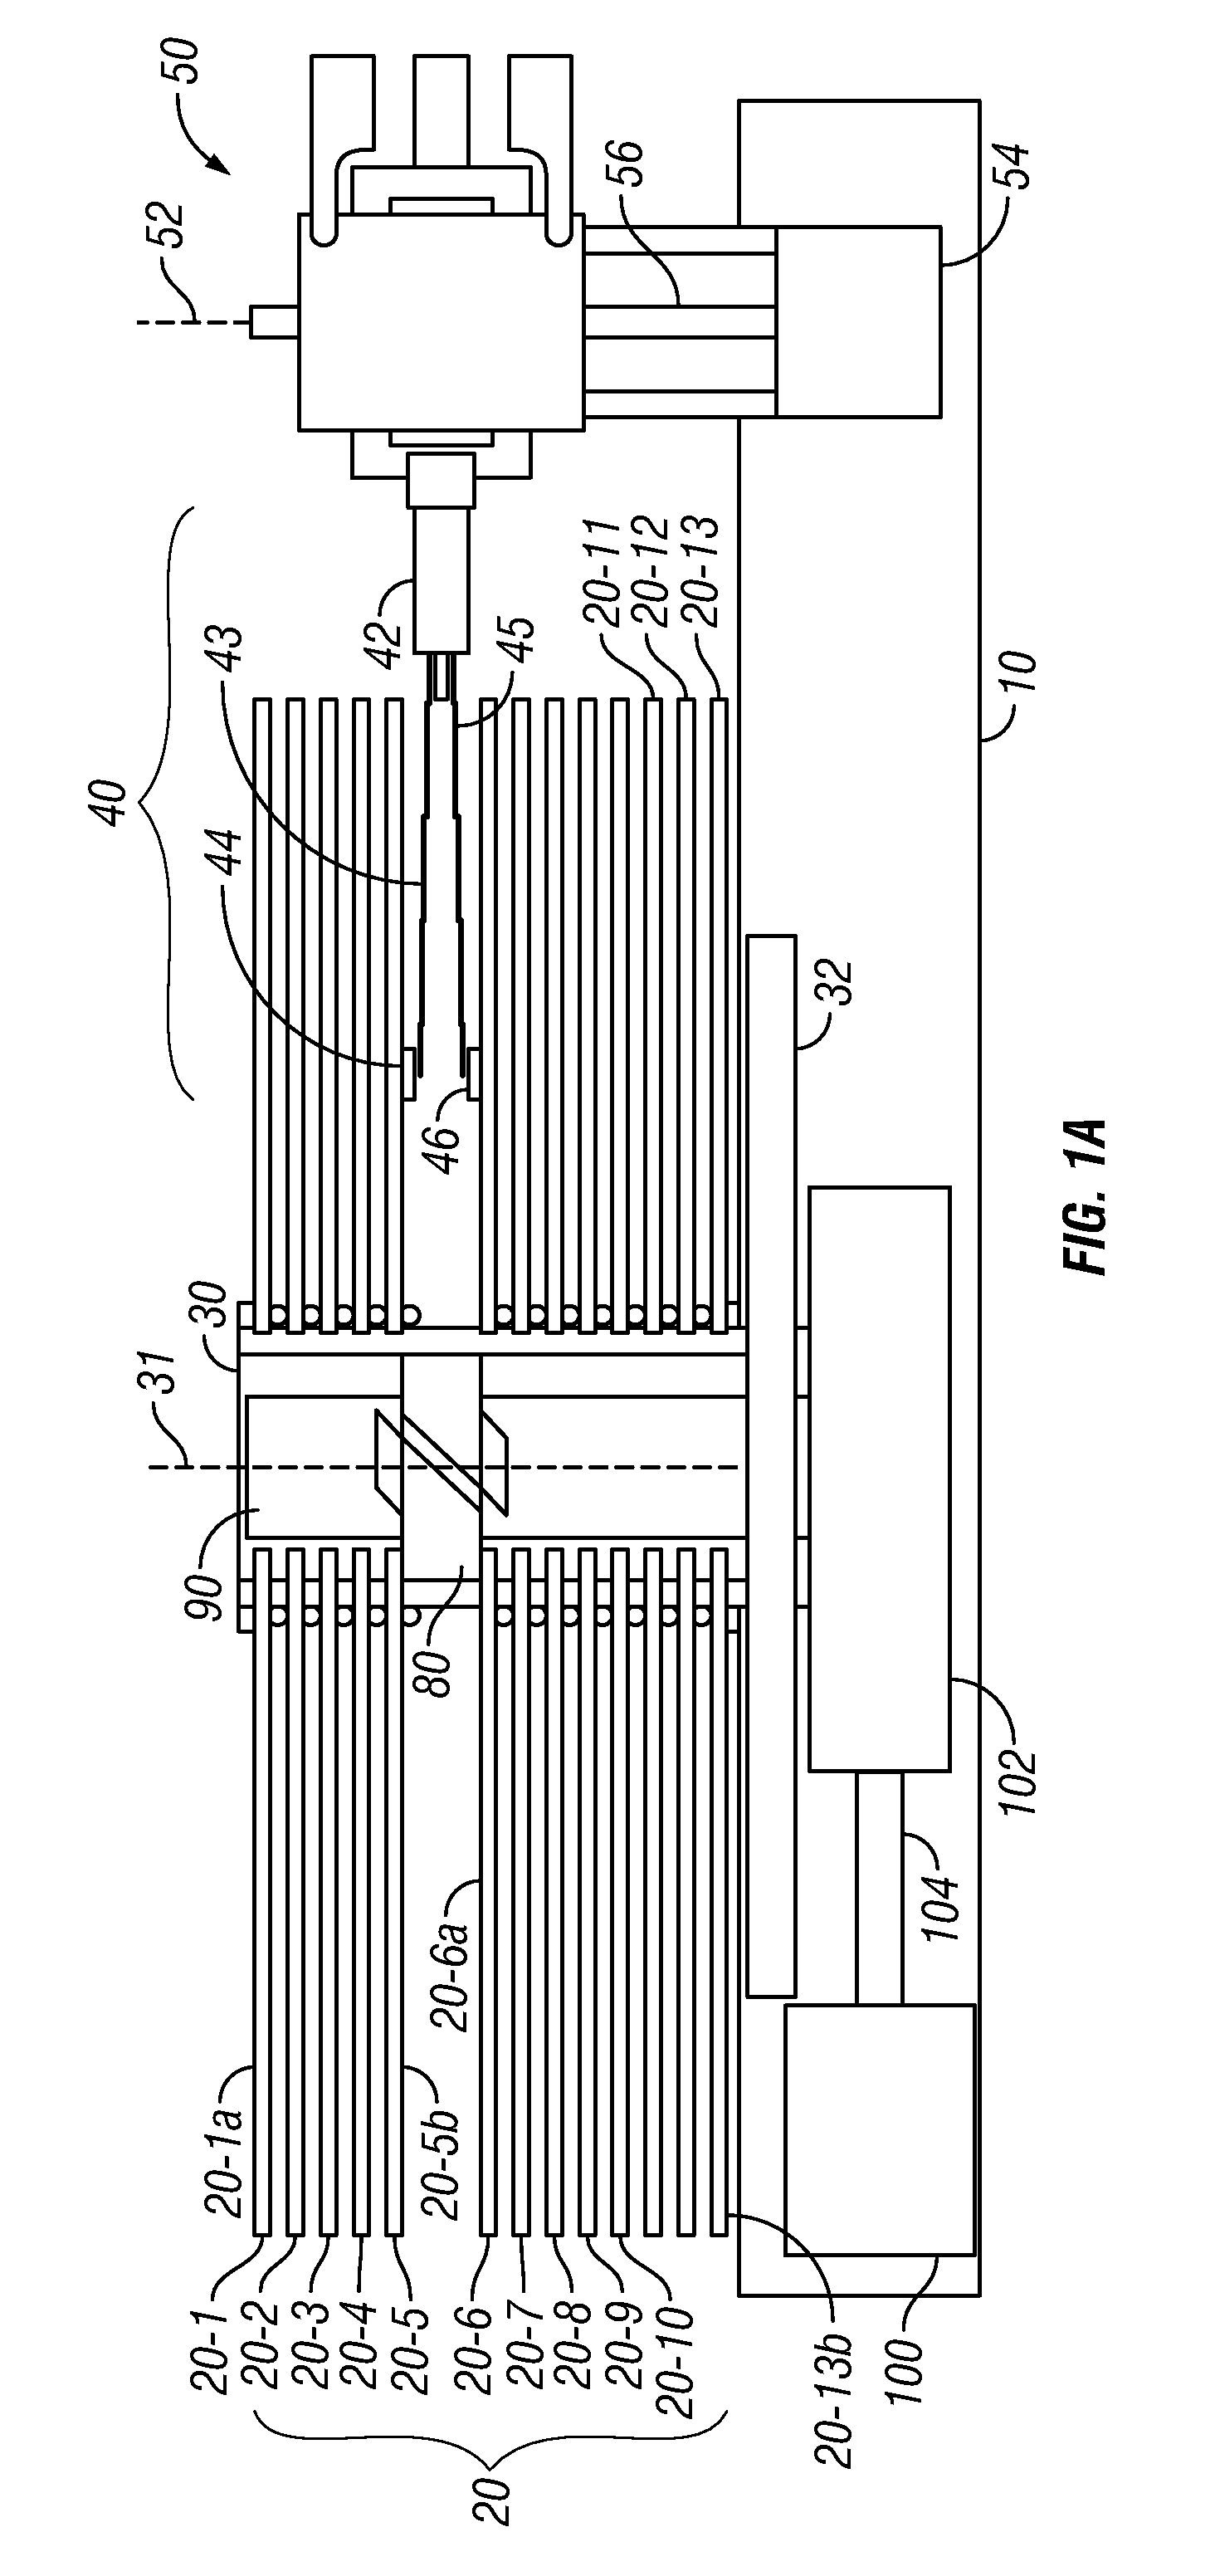 Disk drive having multiple disk surfaces accessible by a read/write head and nonvolatile memory for continuous data transfer